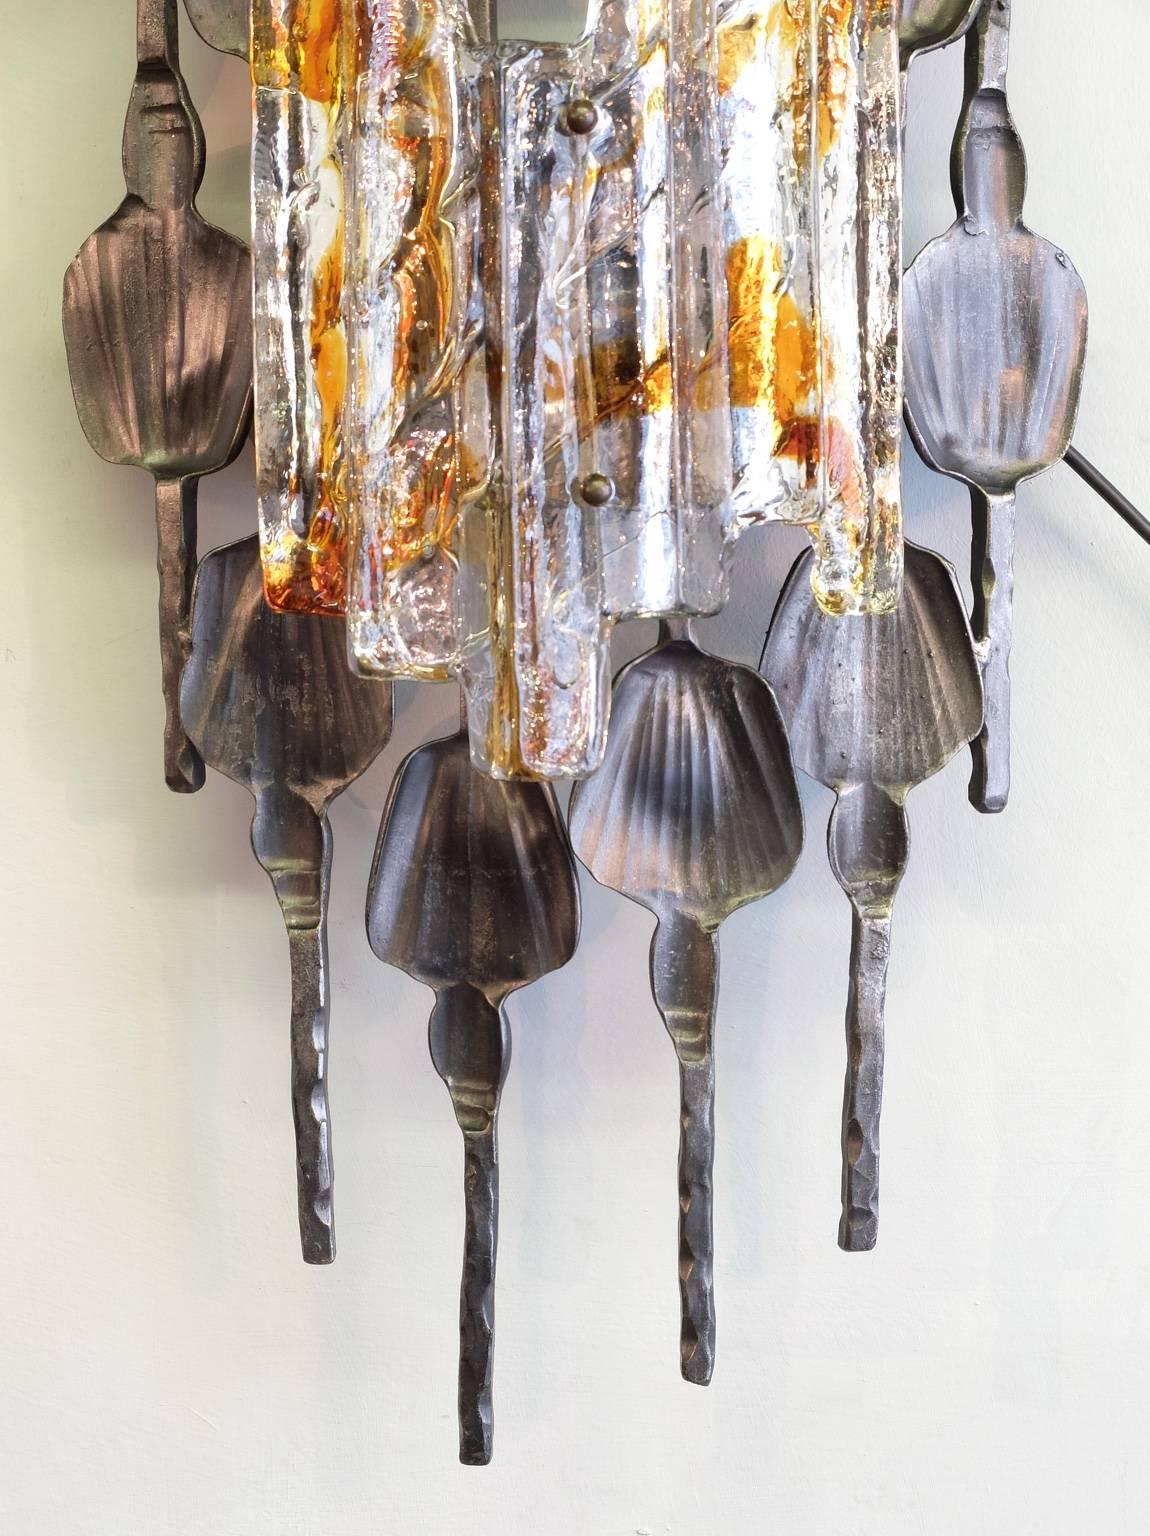 A large wall sconce from Swedish design company A & E Design, circa 1970, in the Brutalist style. The hand-wrought iron surround has a good patination and is set off by the Murano ice glass with its clear and amber tones. This wall light has been